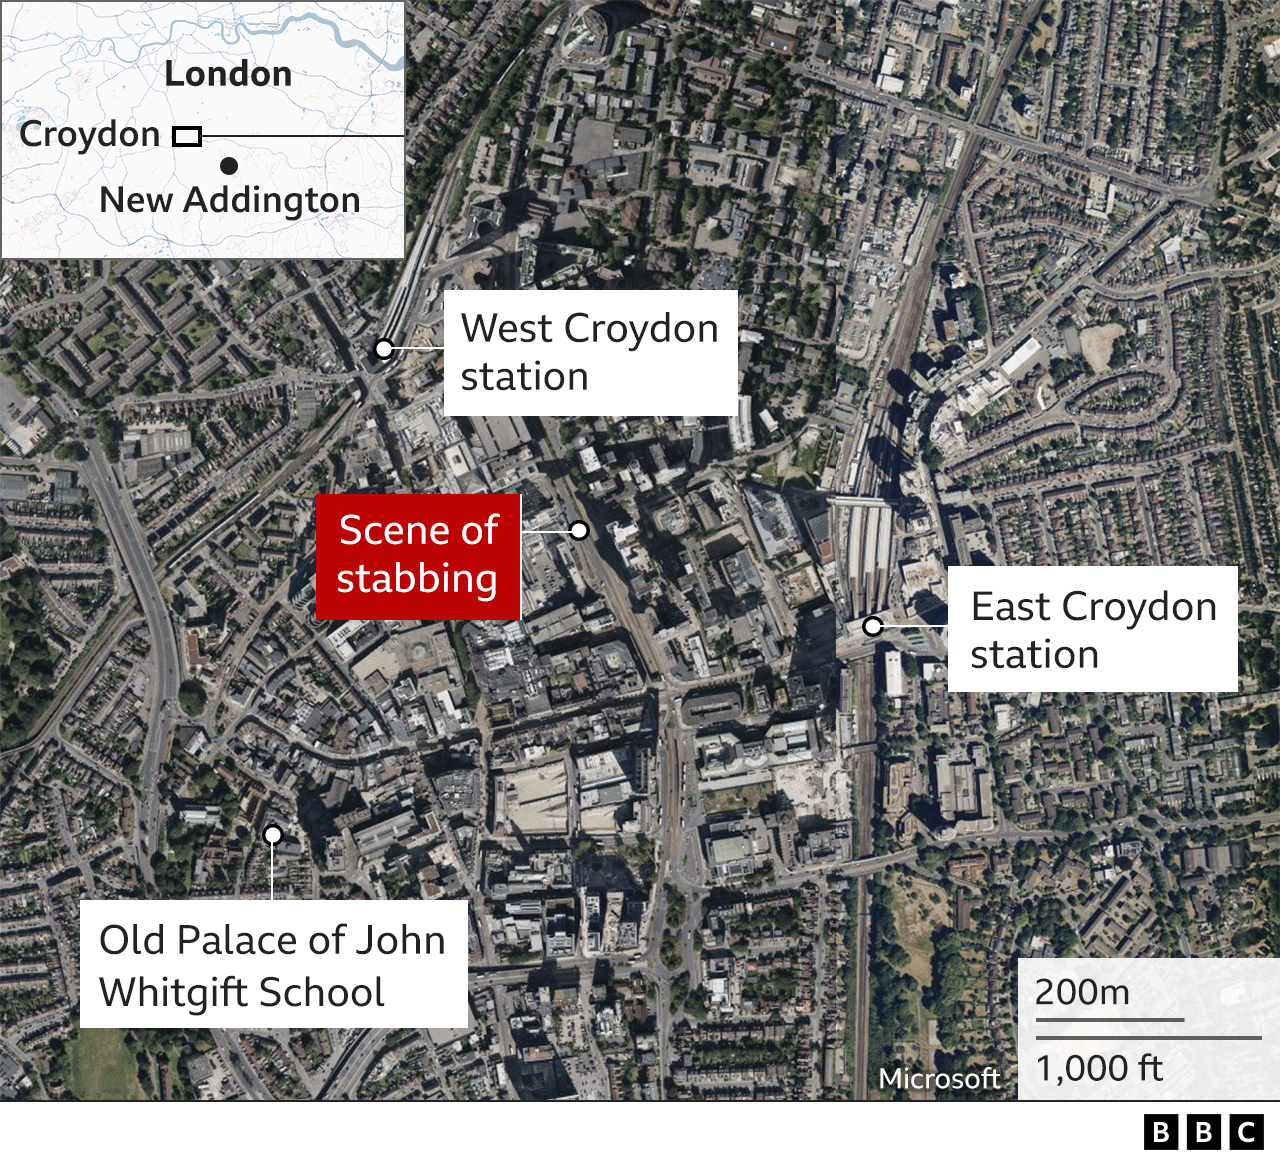 Map showing the scene of the stabbing, arrest location of Old Palace of John Whitgift School.